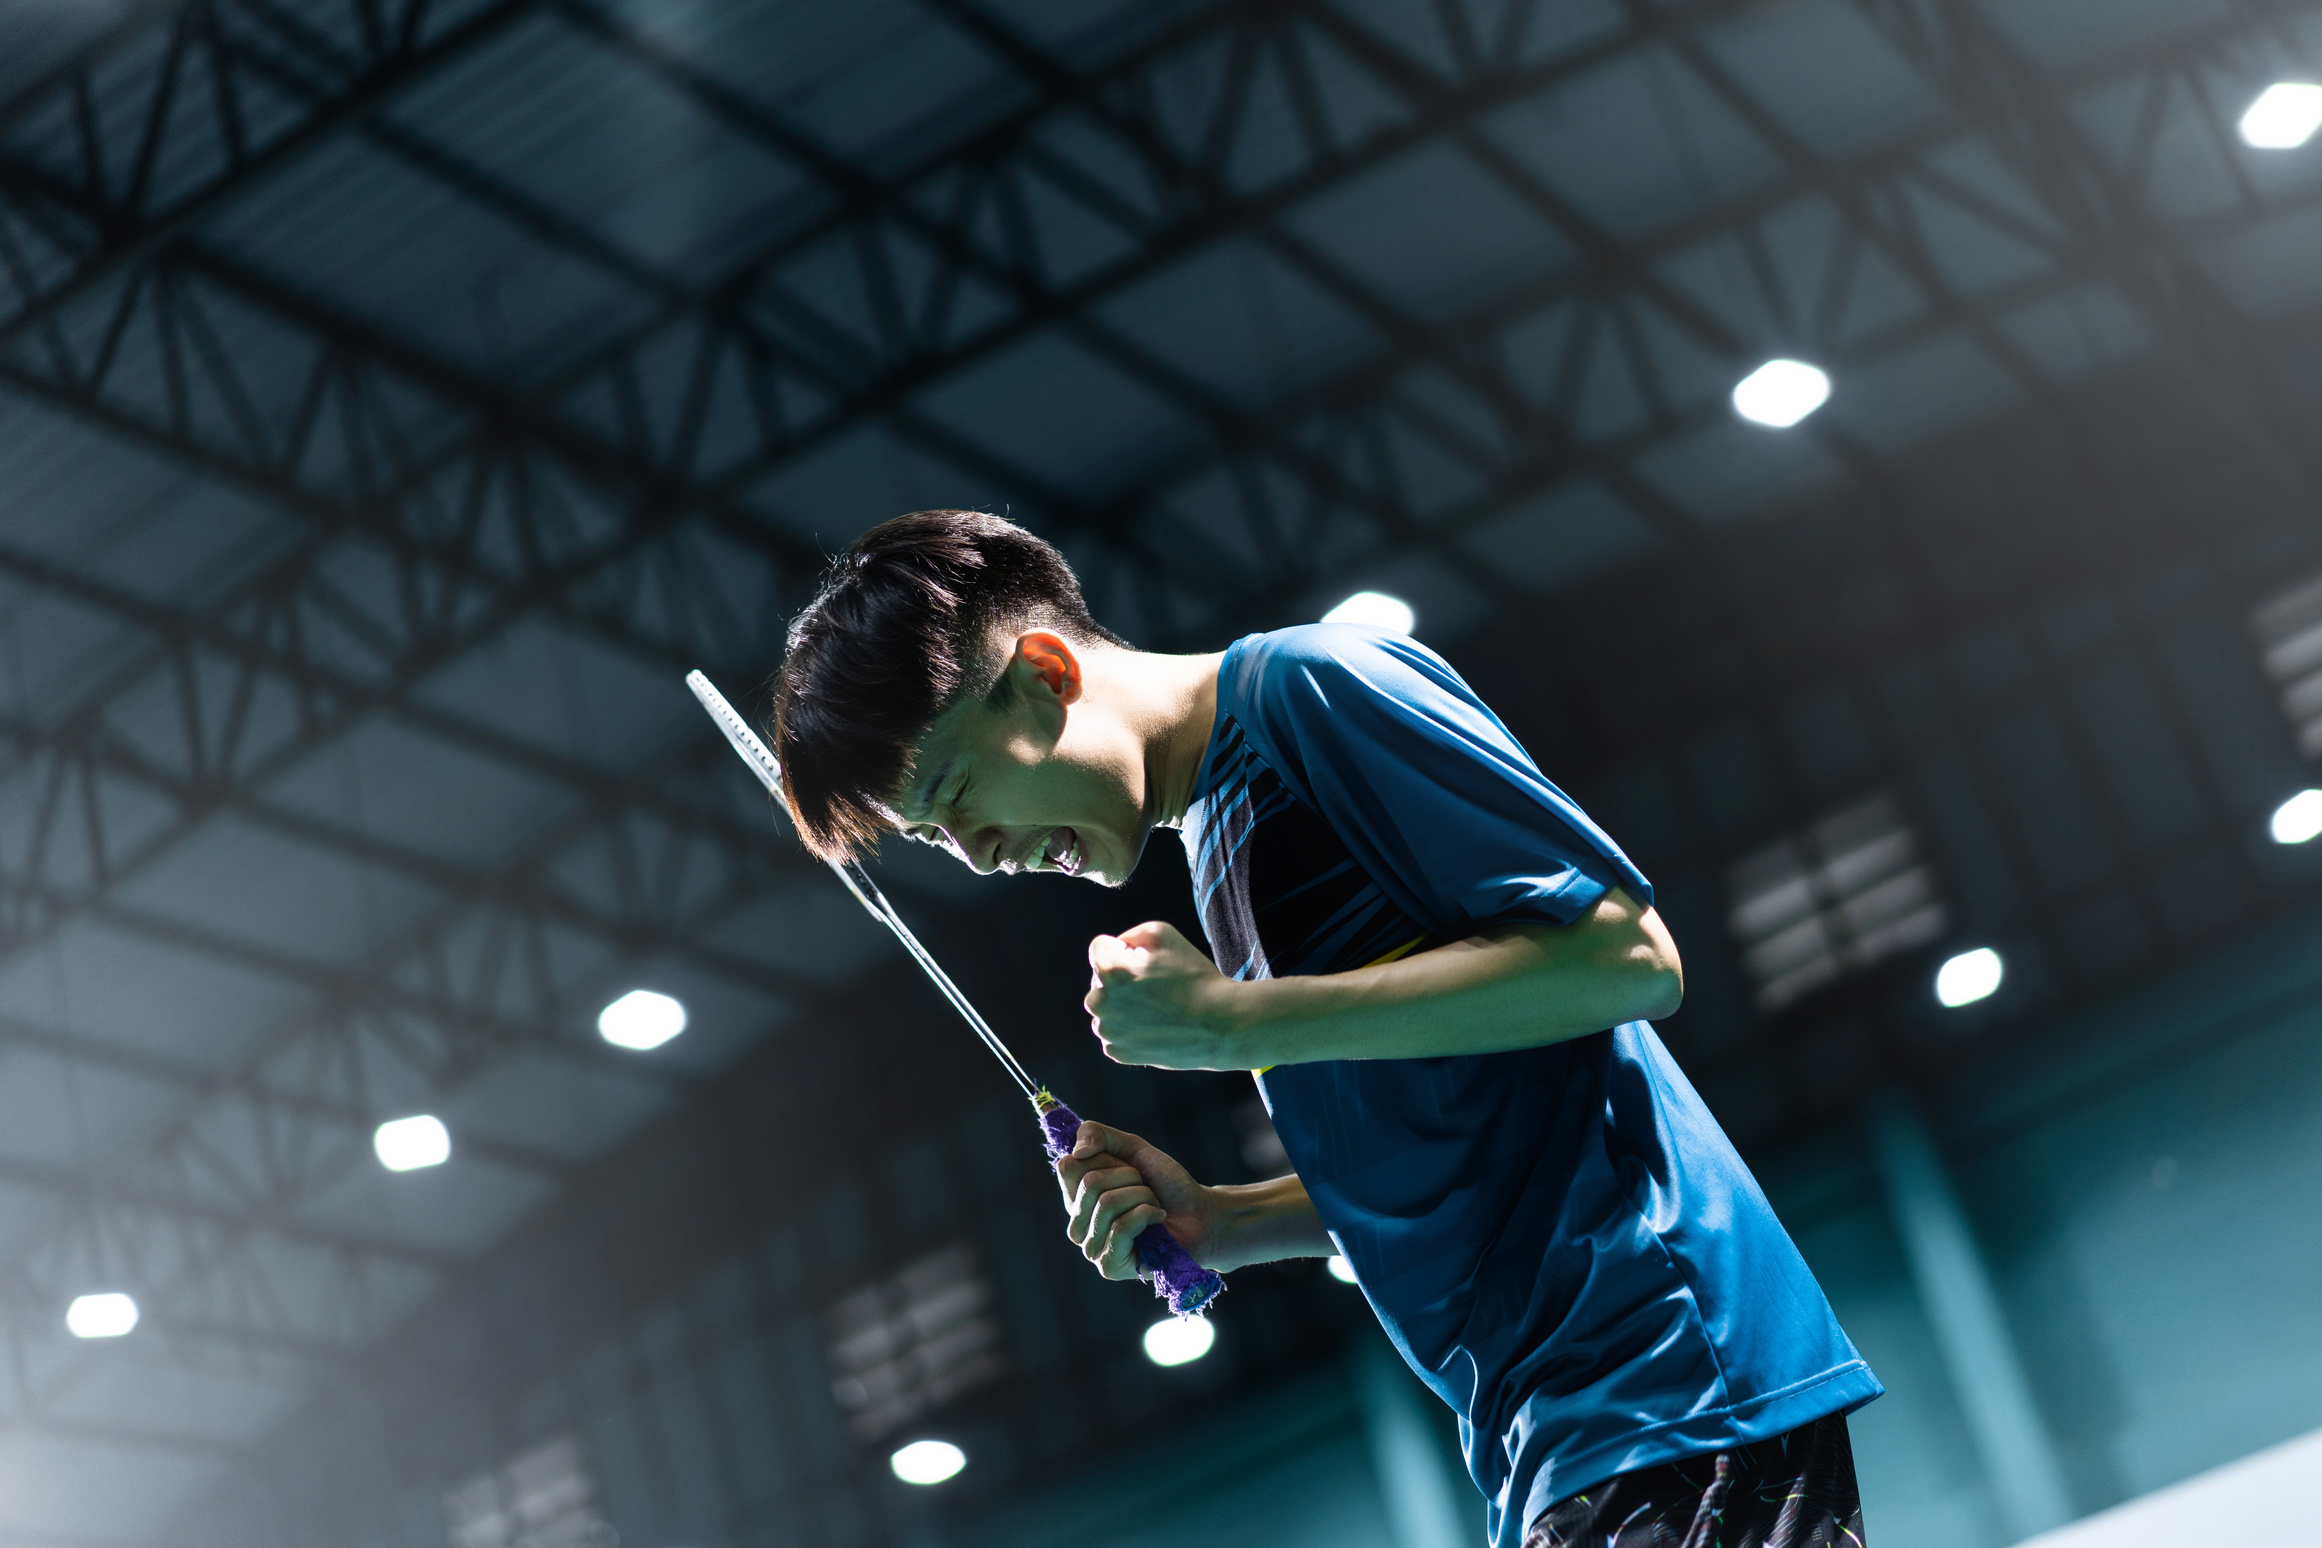 Asian badminton player is glad he scored